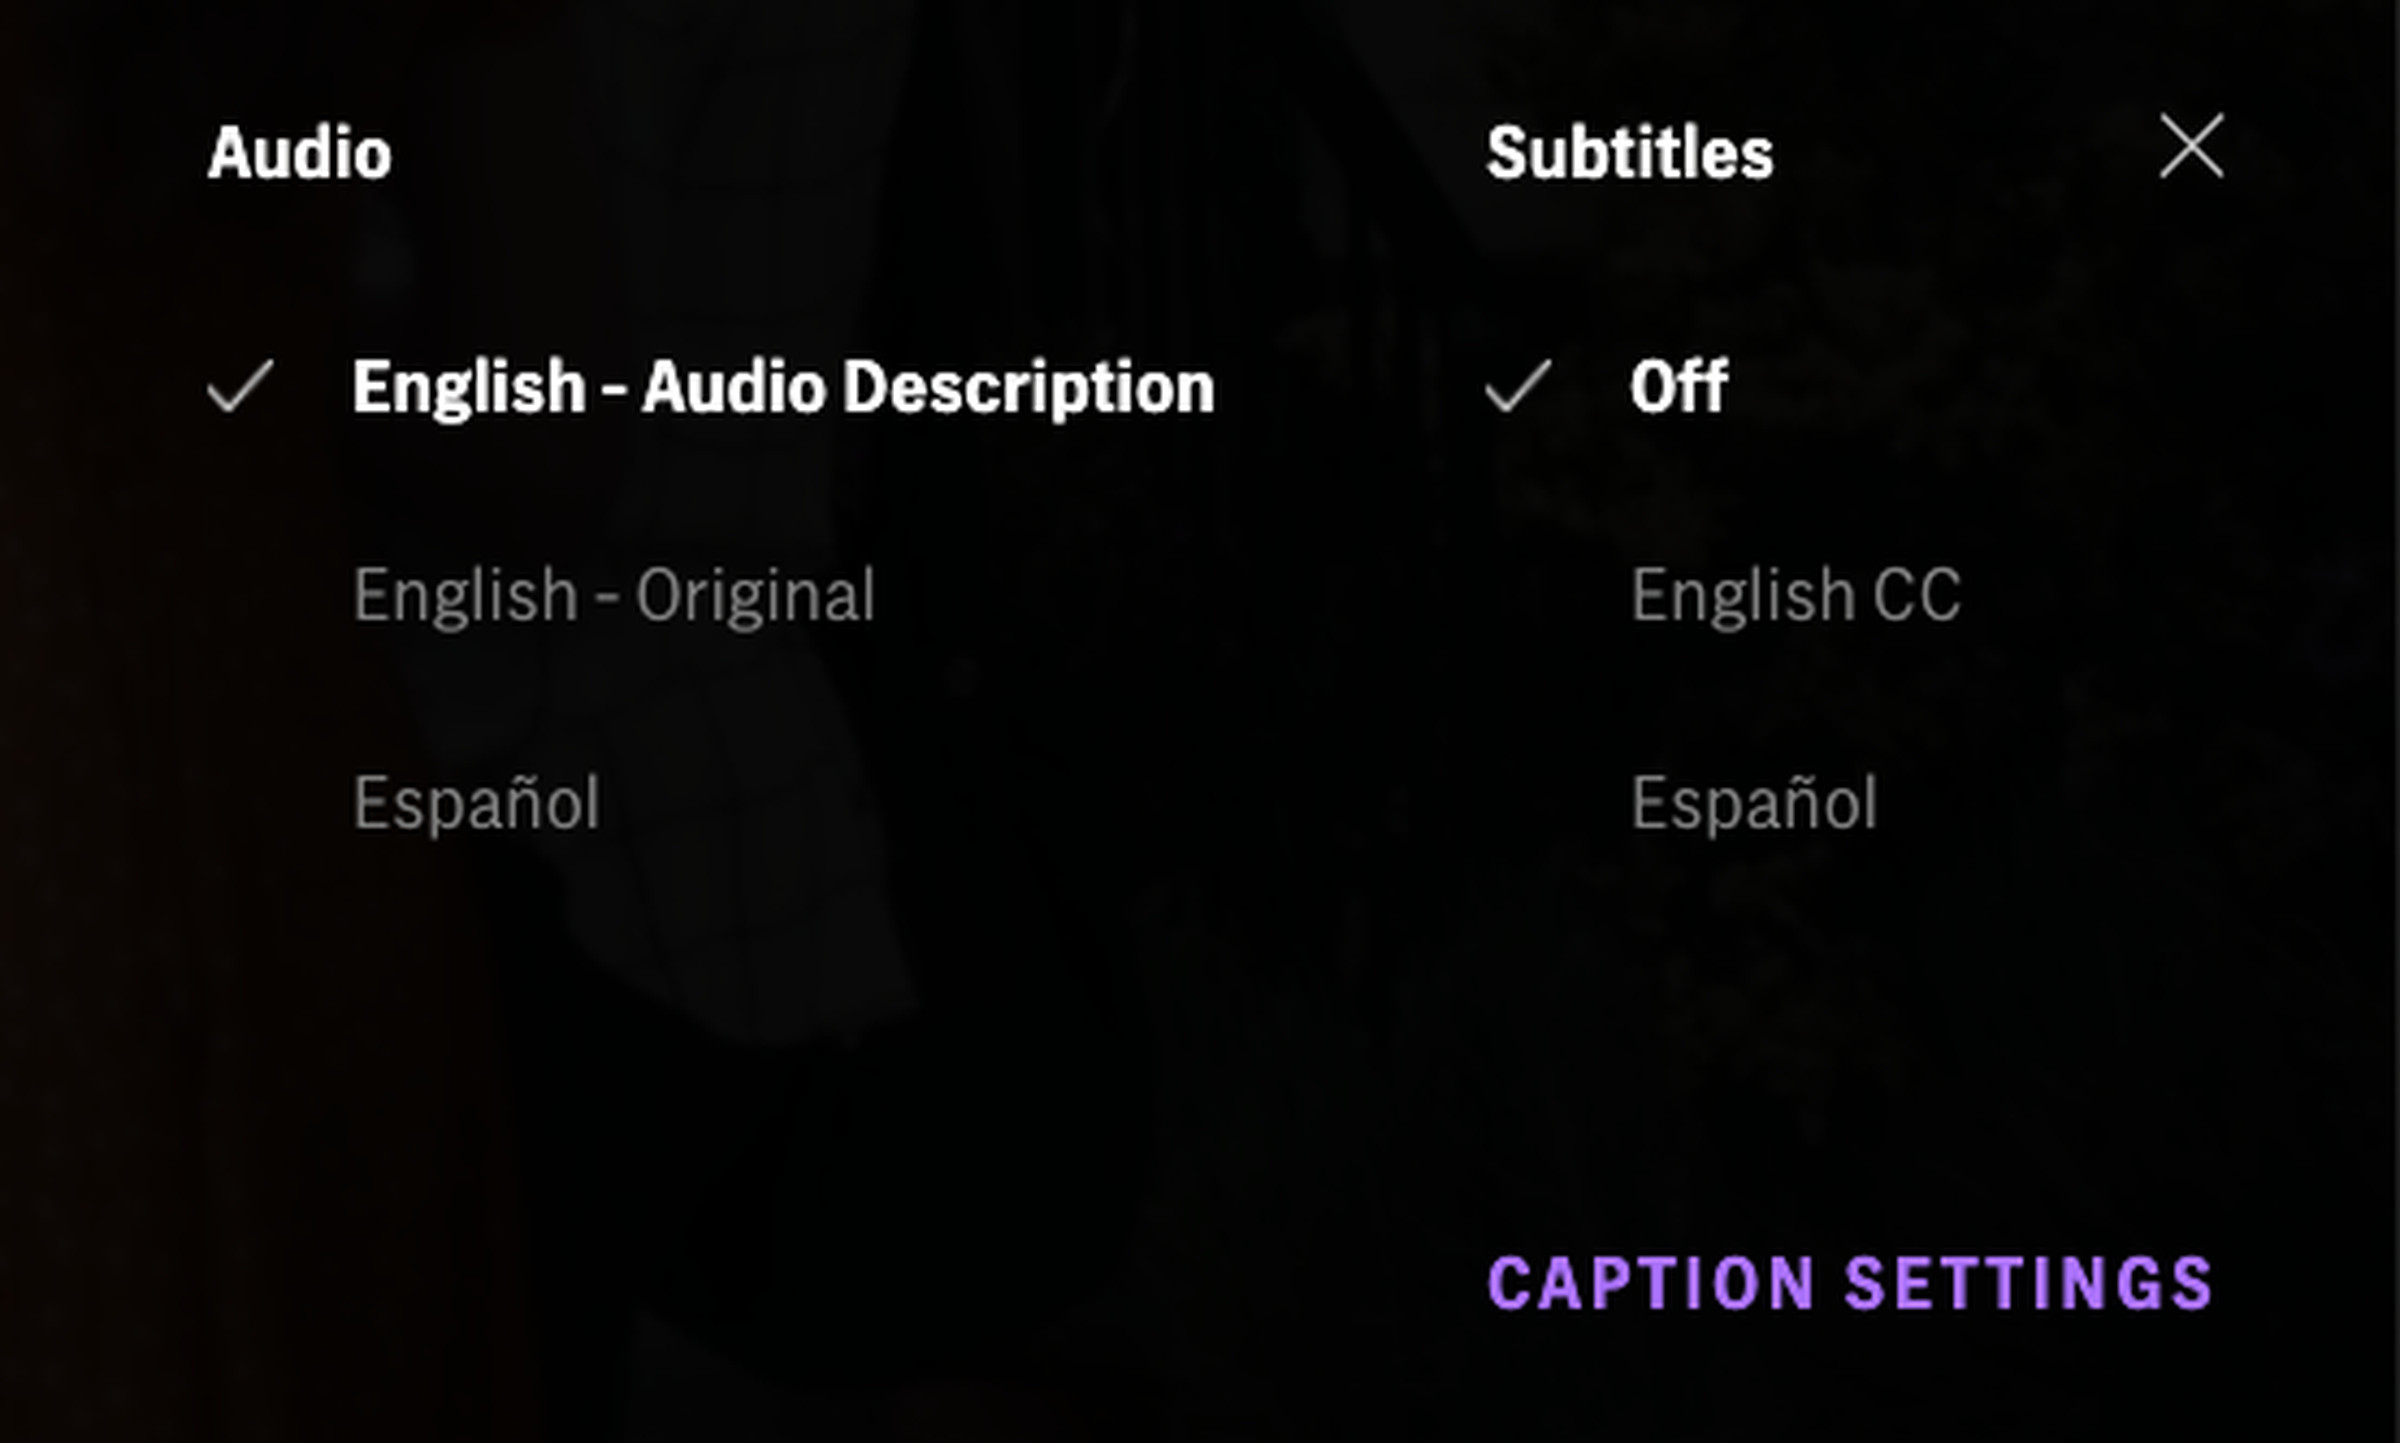 The caption settings tab in HBO Max showing a checked option for “English – Audio Description” along with options for subtitles in English and Spanish.